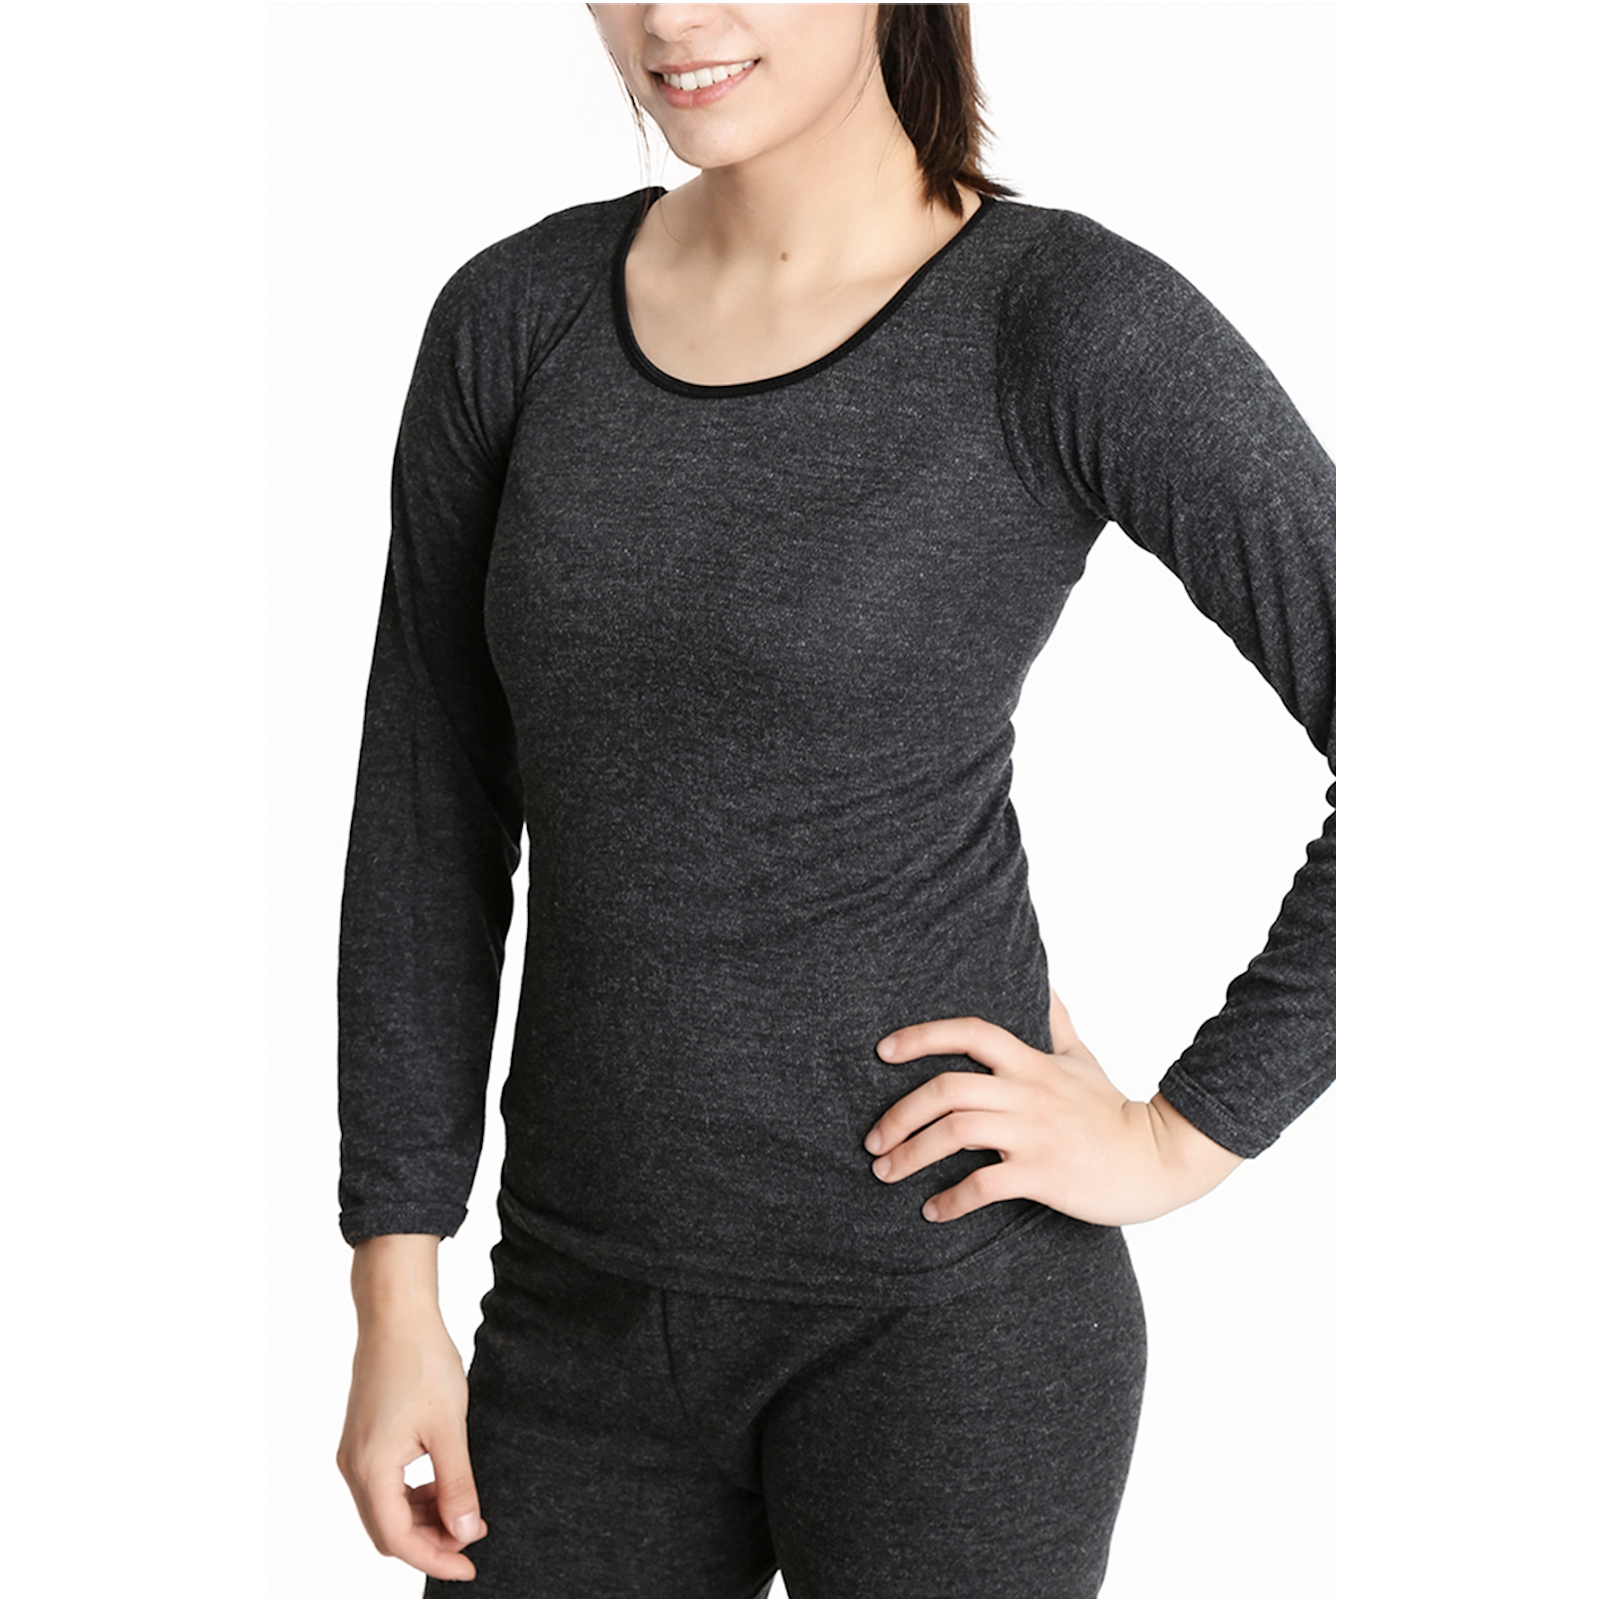 Long Sleeved Thermal Spencer Top - Underwear T shirt 